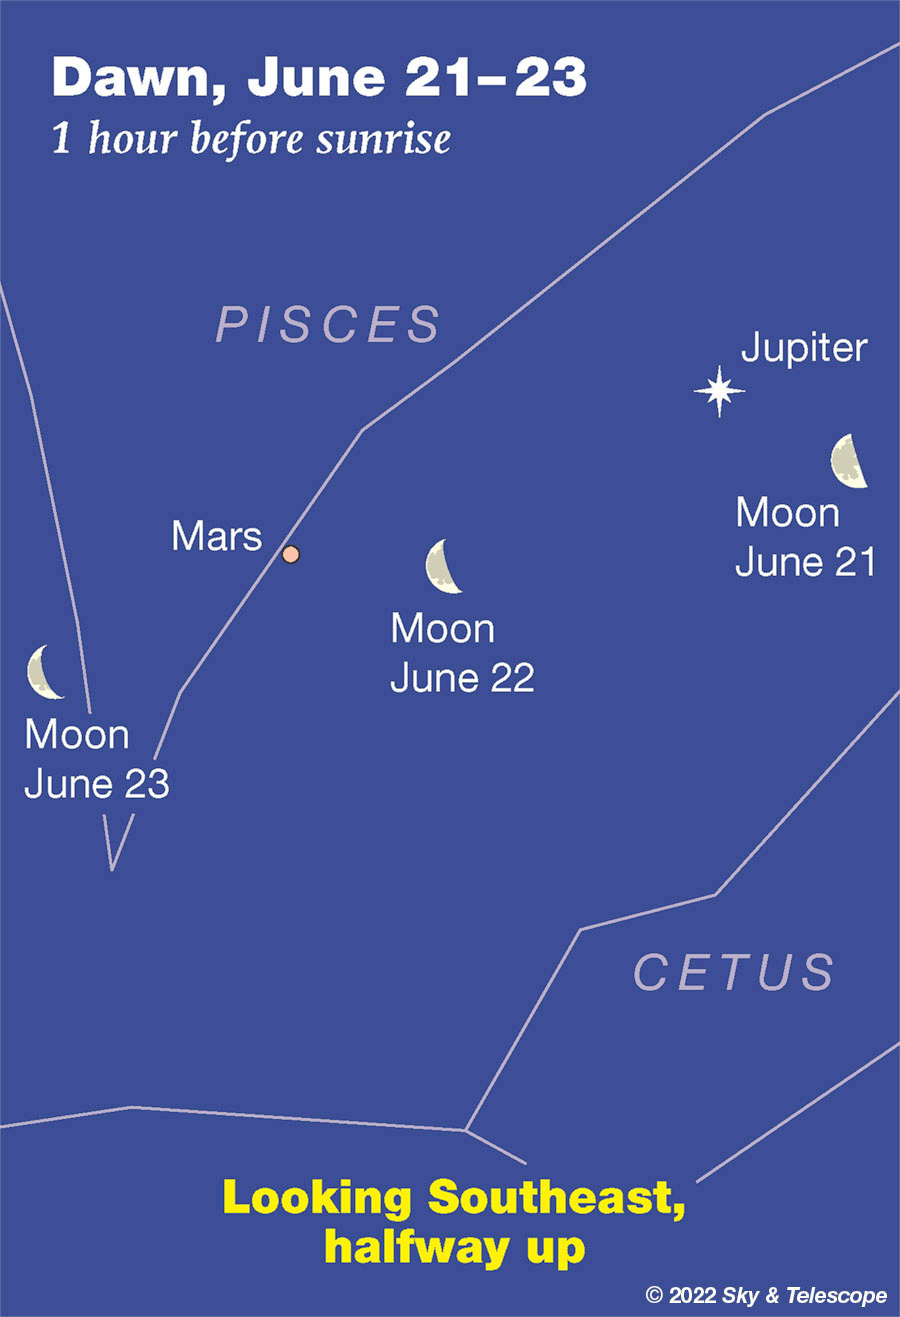 The waning Moon passing Jupiter and Mars in the dawn, June 21-23, 2022